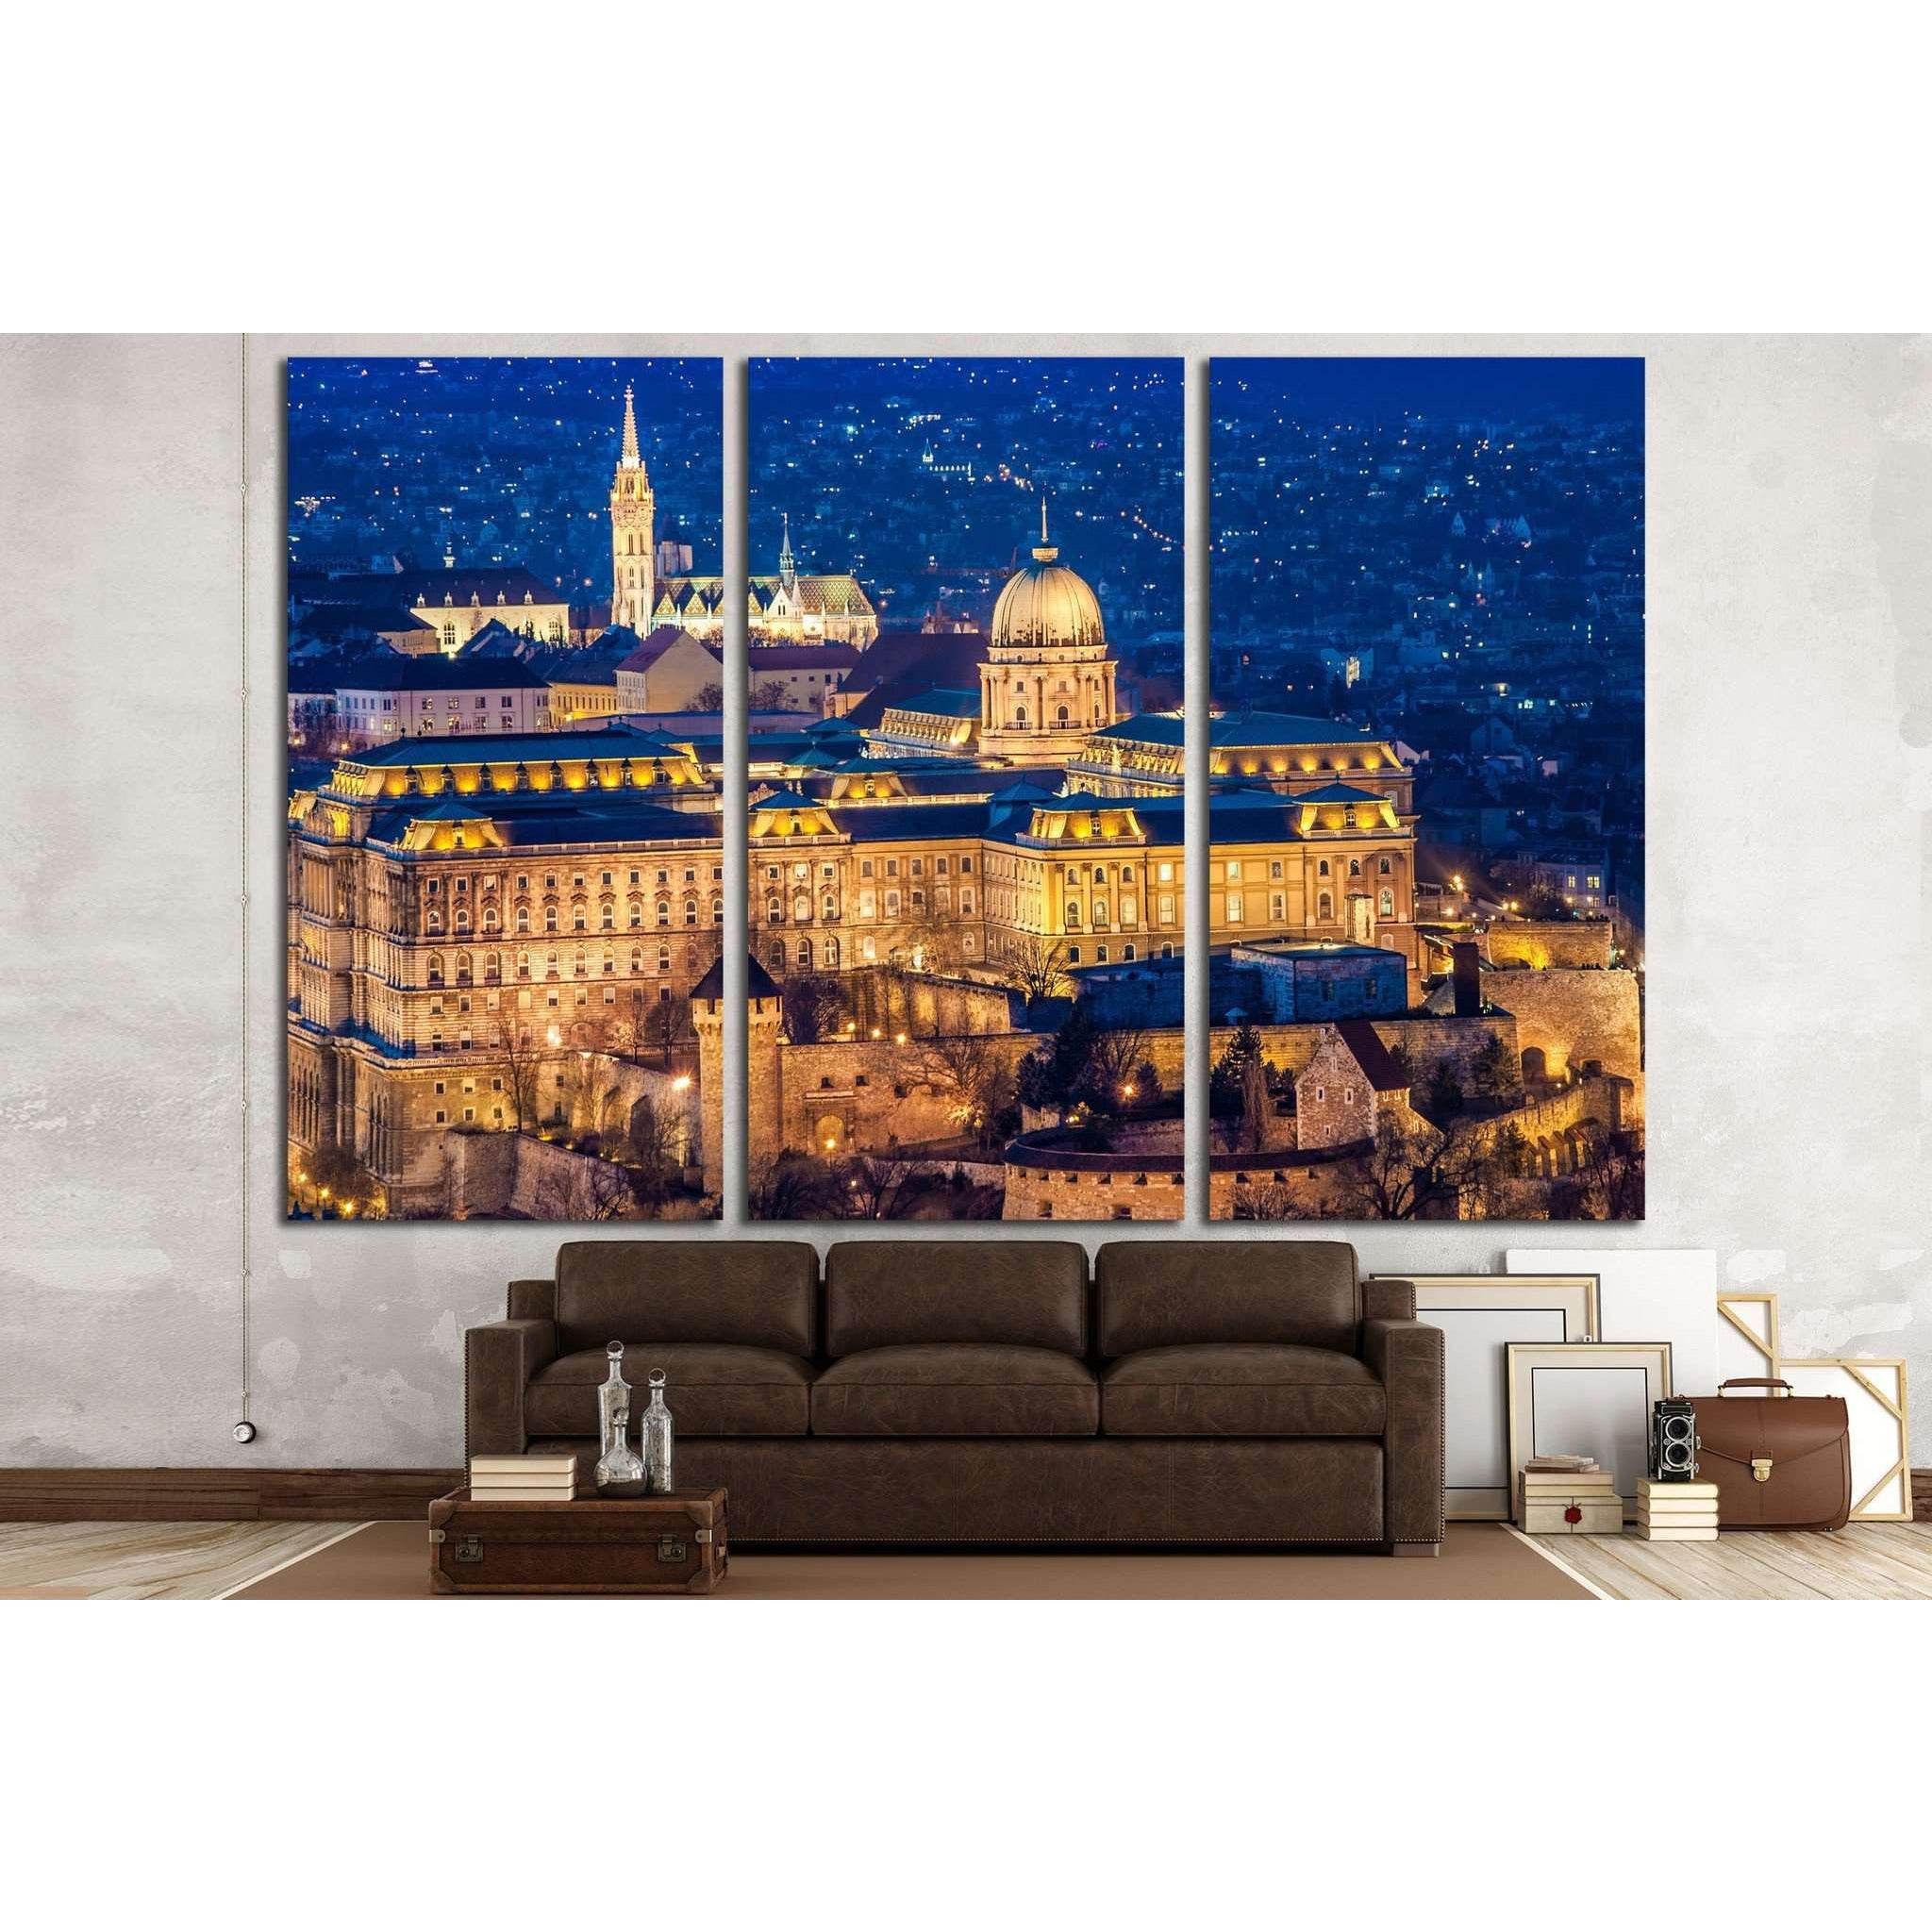 The Buda Castle, Budapest №1770 Ready to Hang Canvas Print